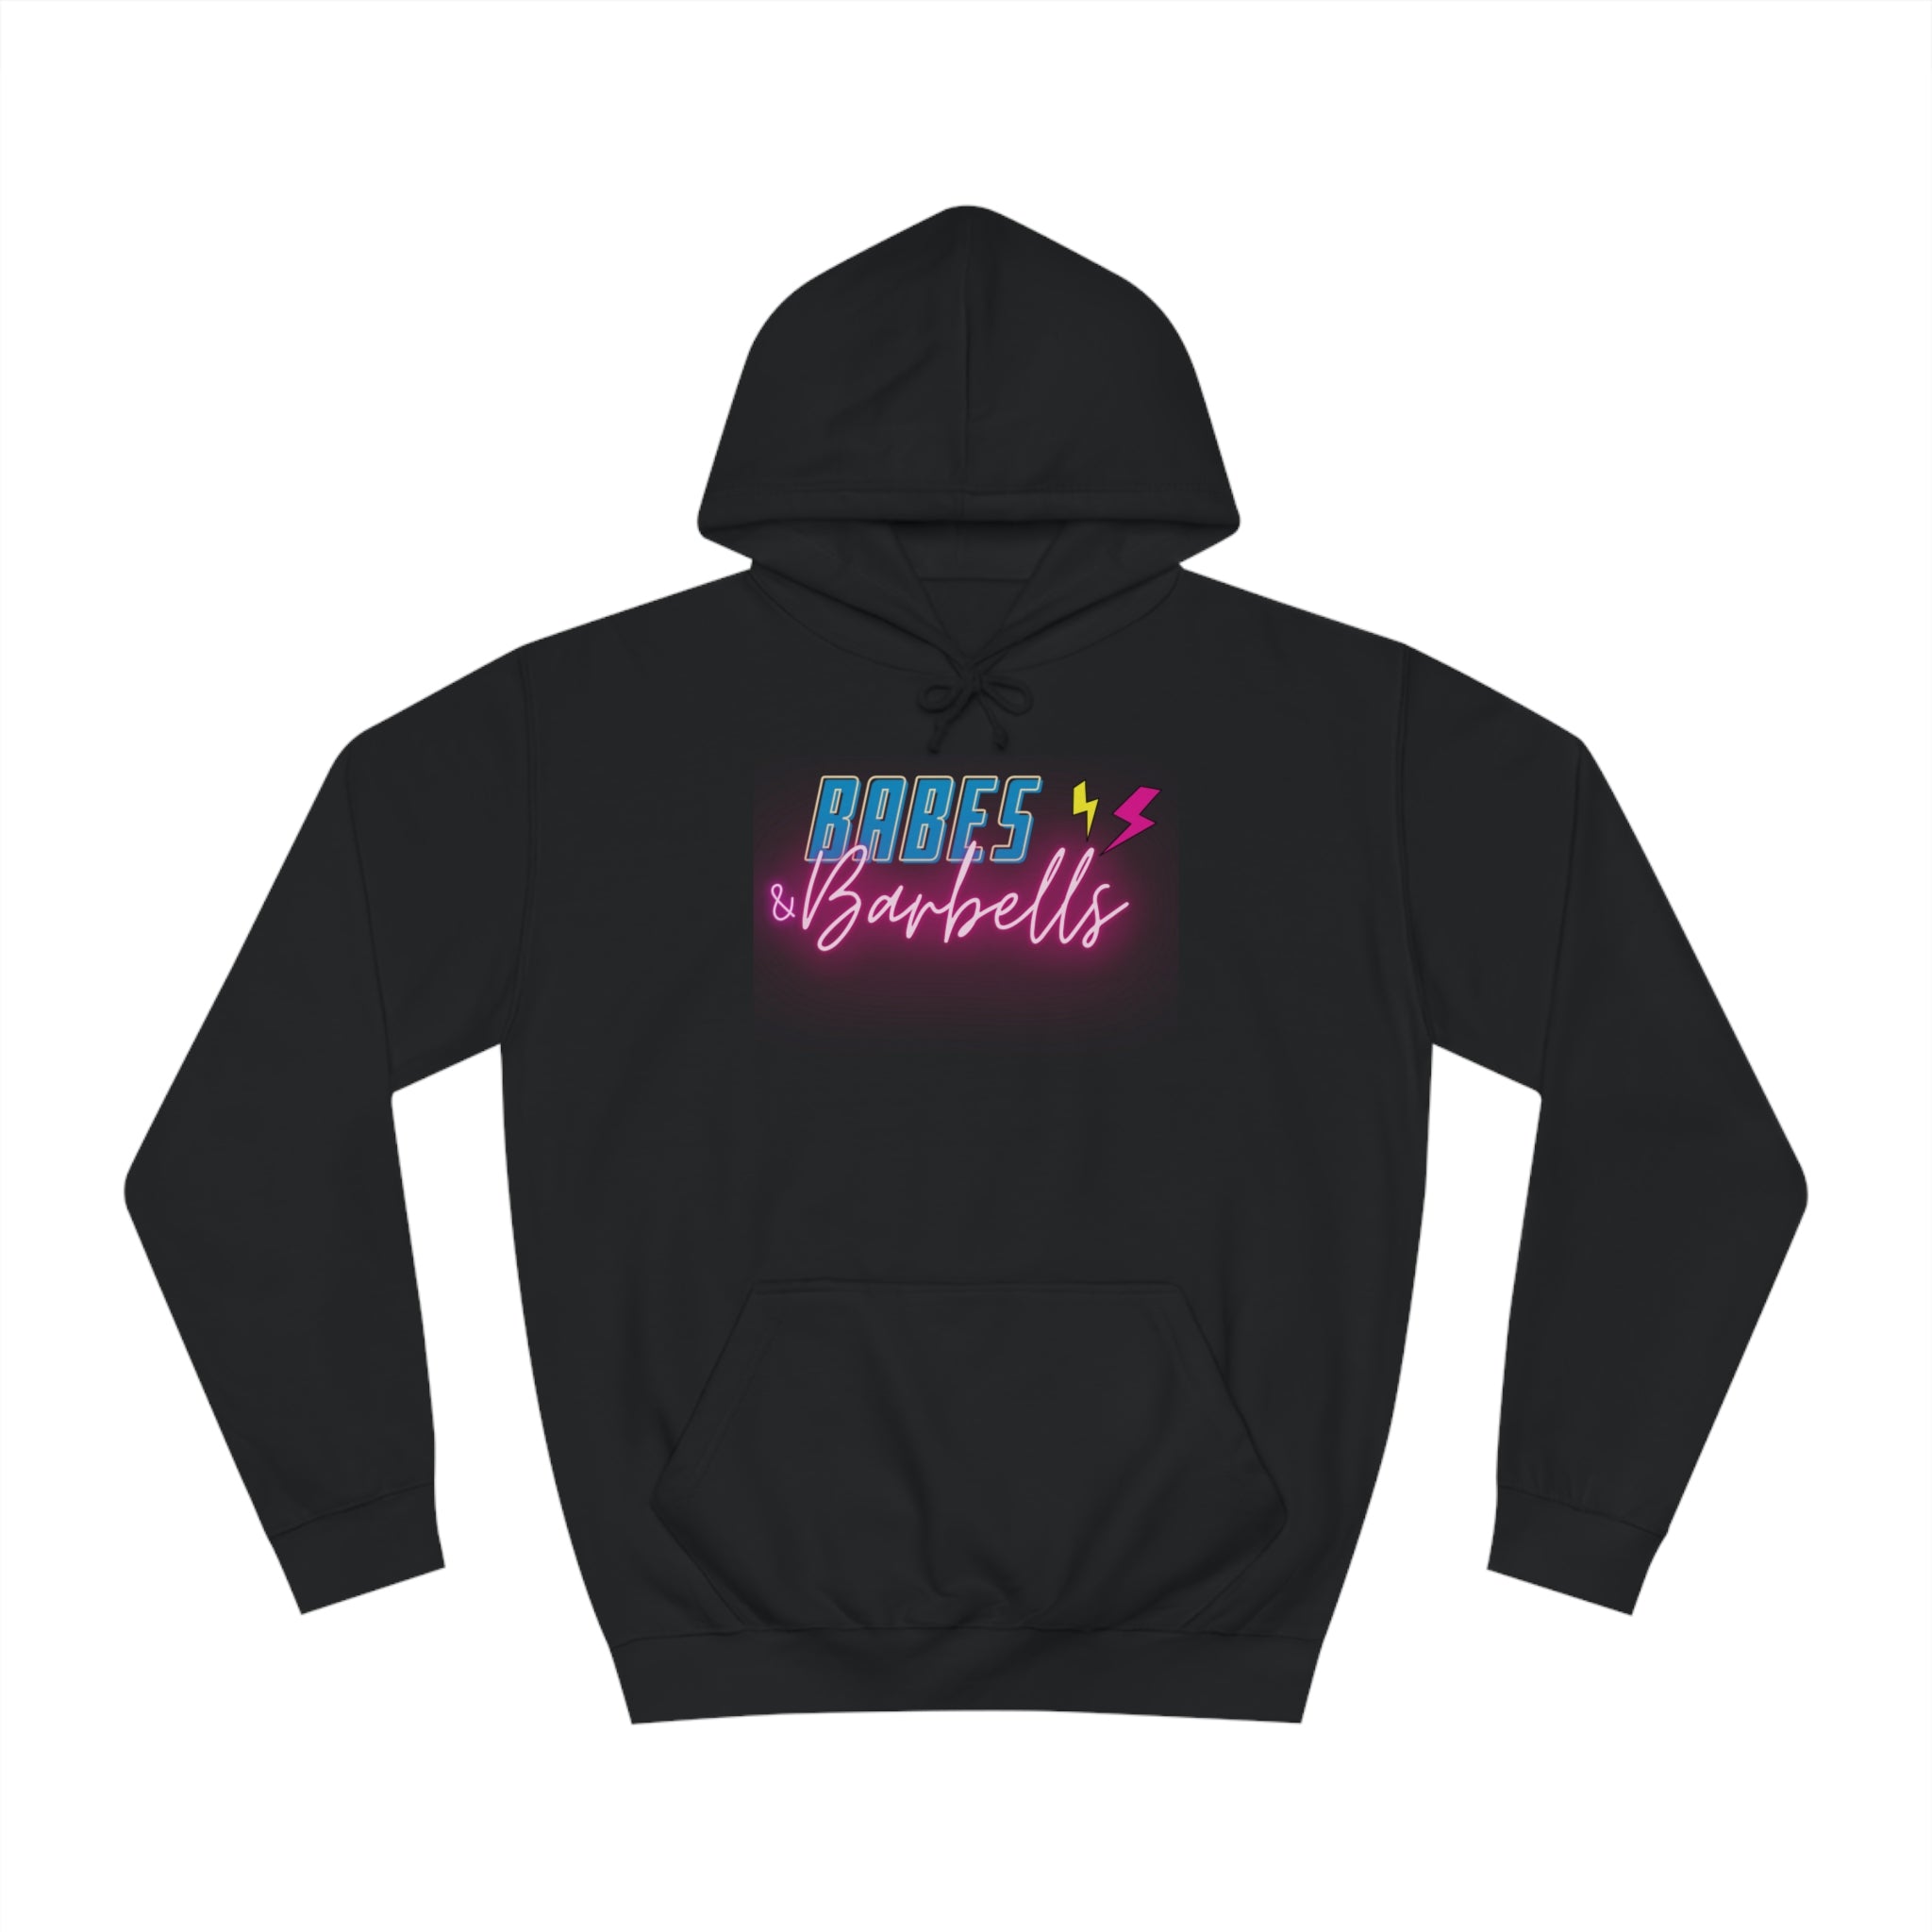 Babes & Barbell's Unisex Hoodie